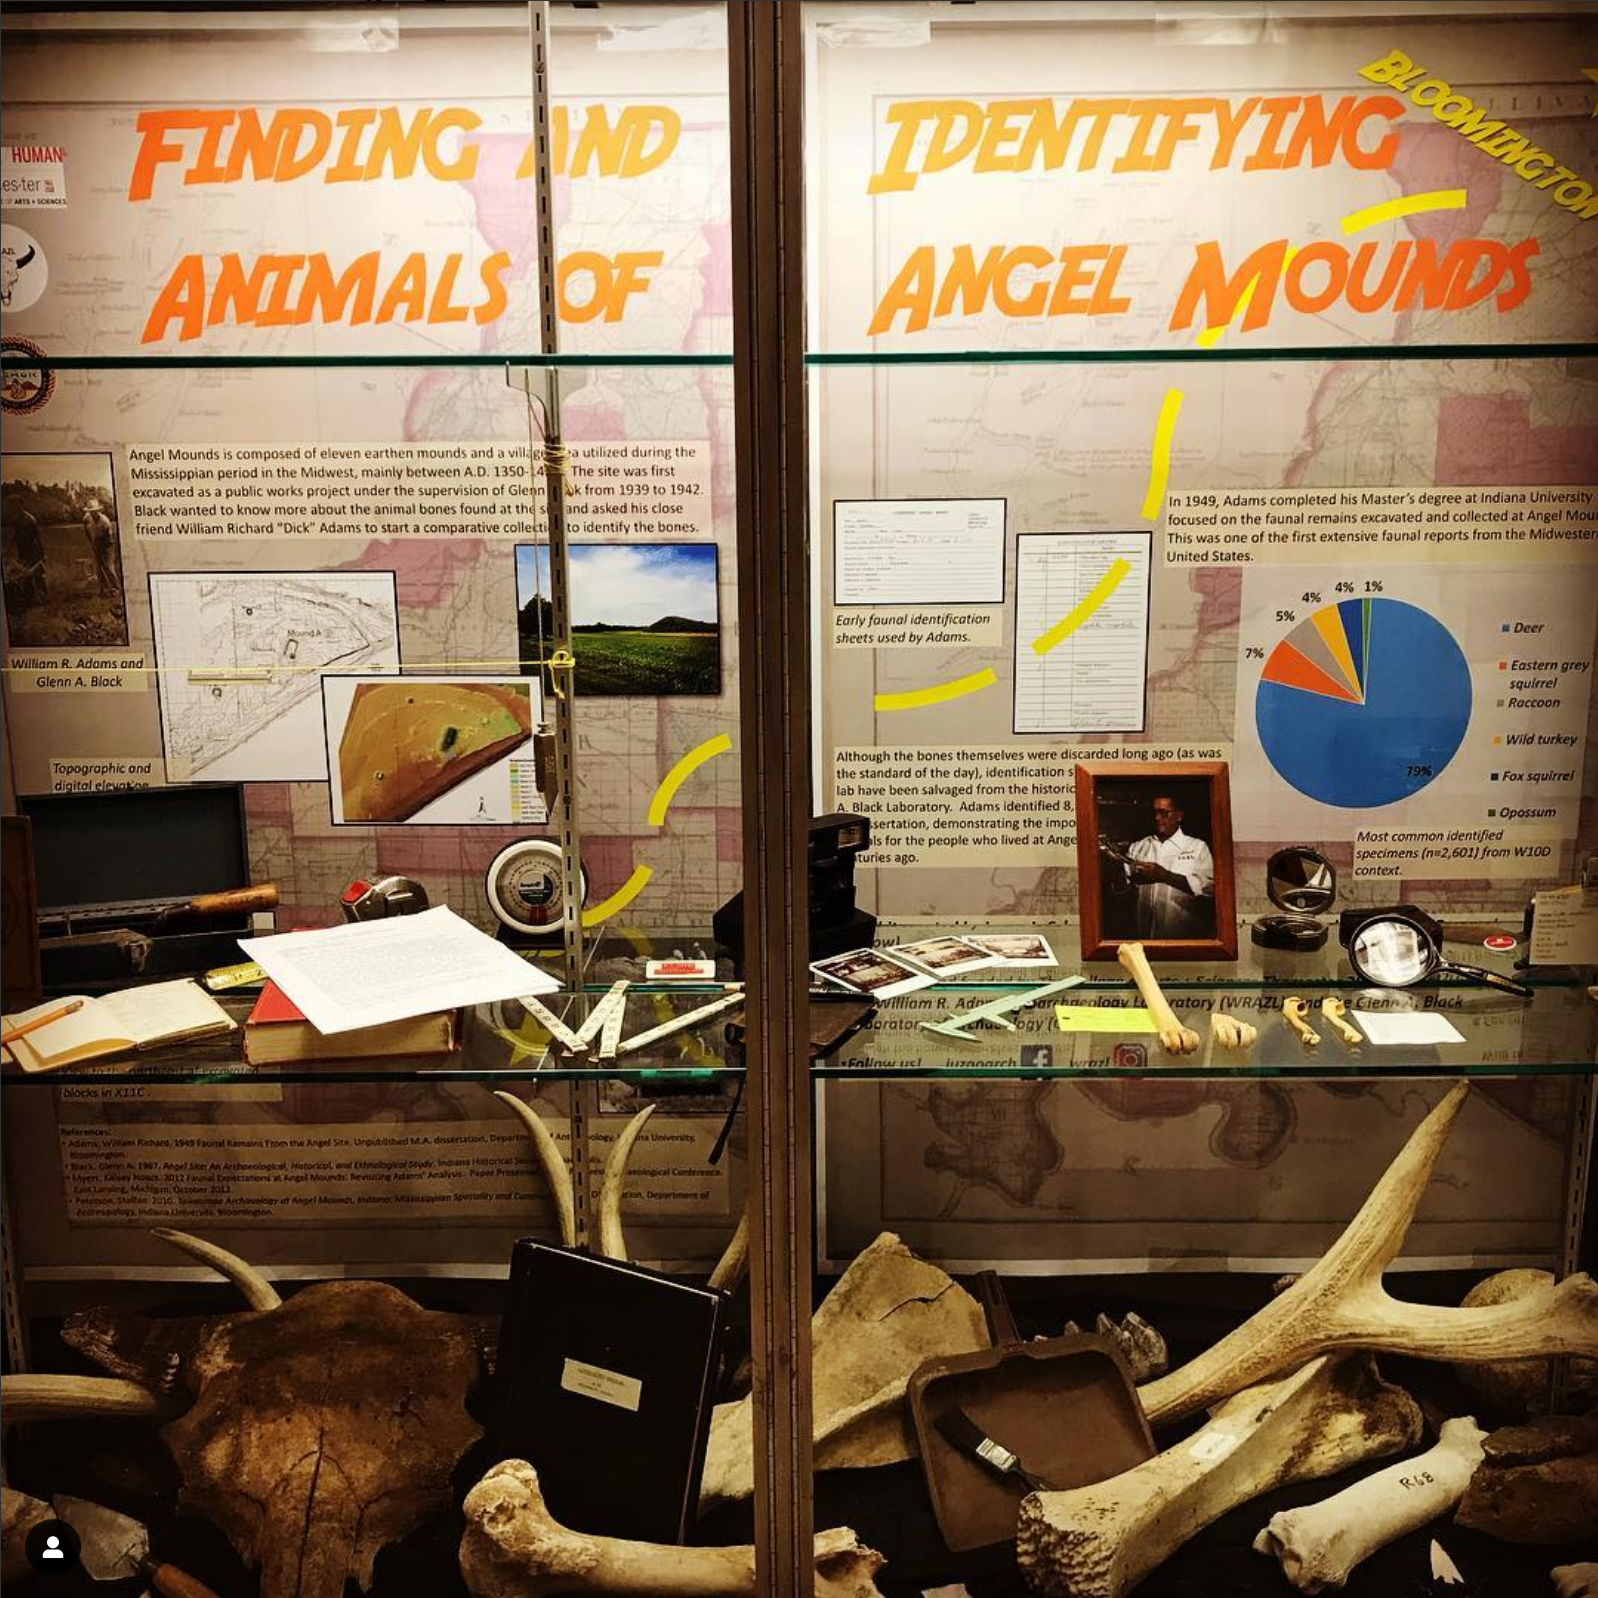 A display about identifying animals at Angel Mounds